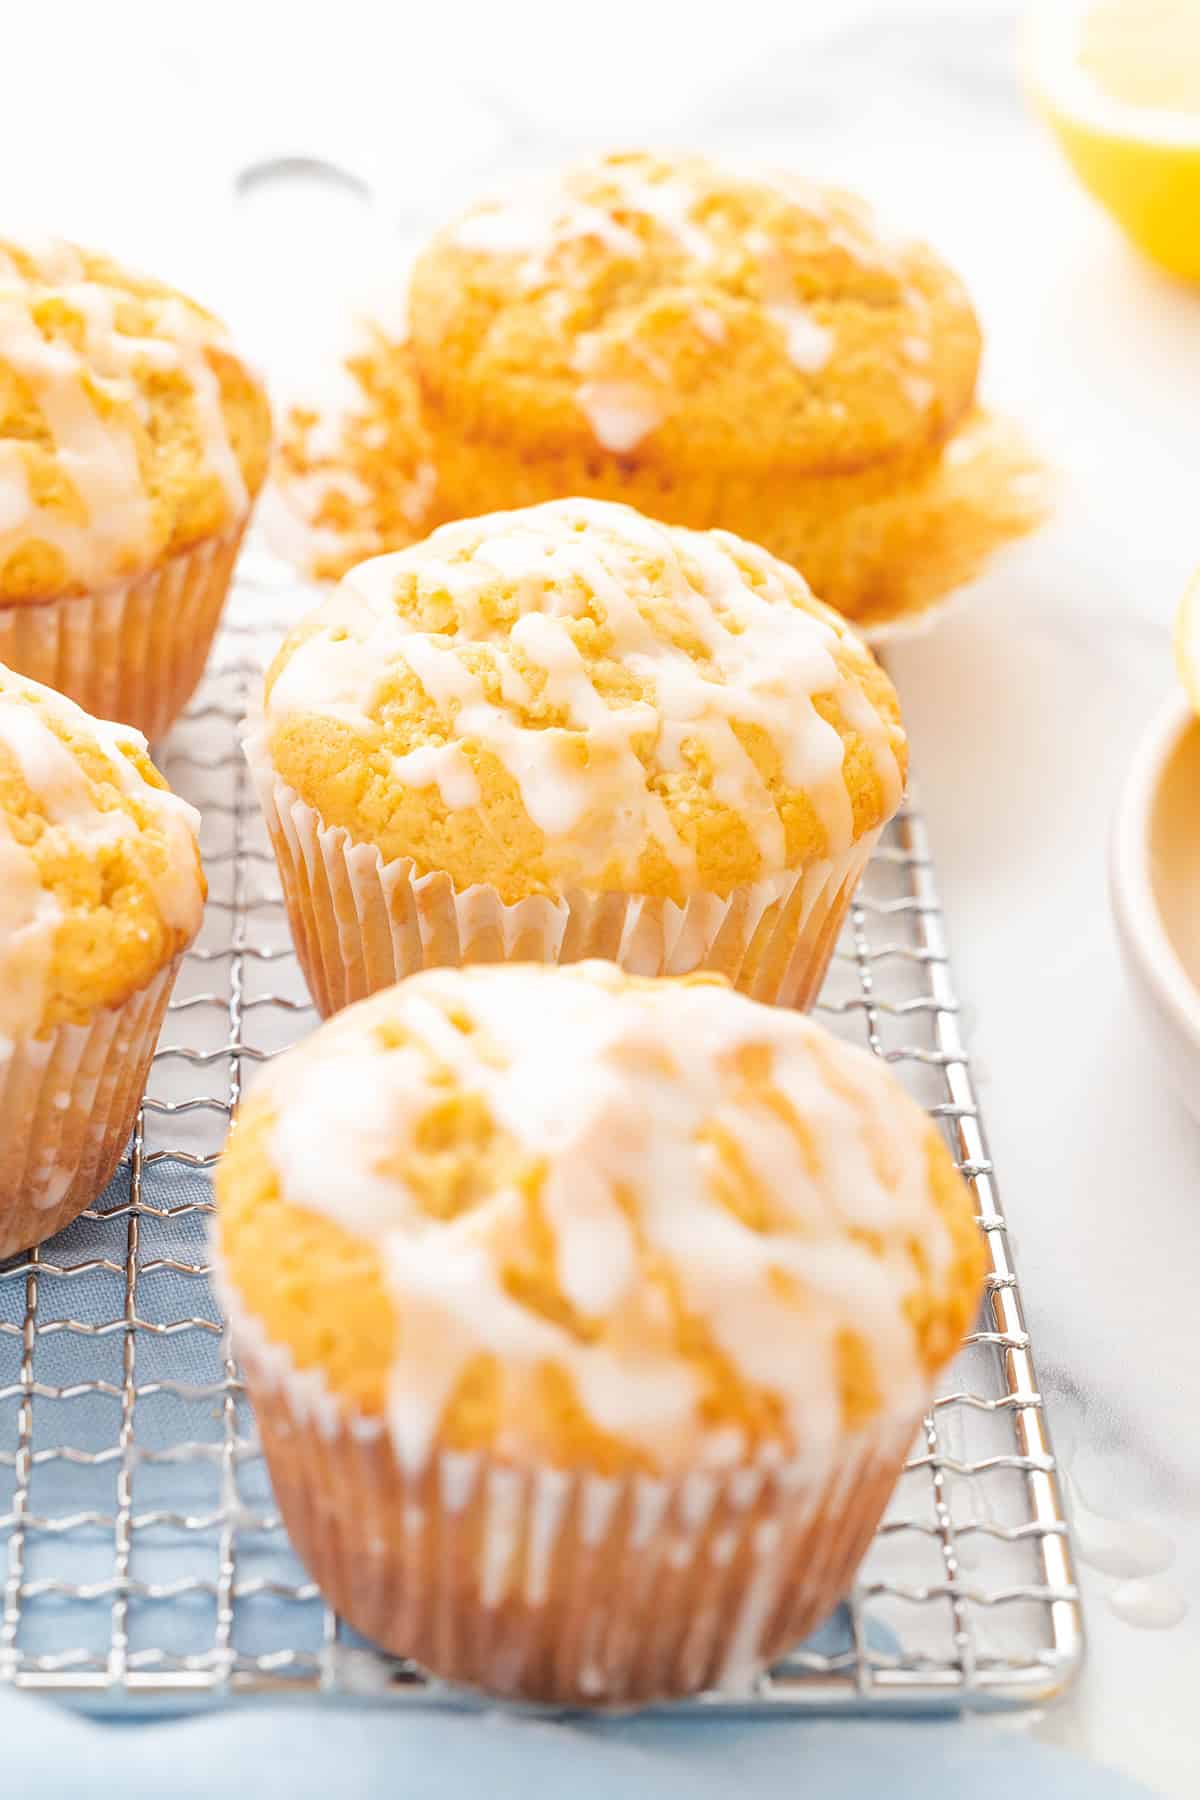 Five lemon glazed muffins resting on a wire rack on a white counter top with a light blue napkin.